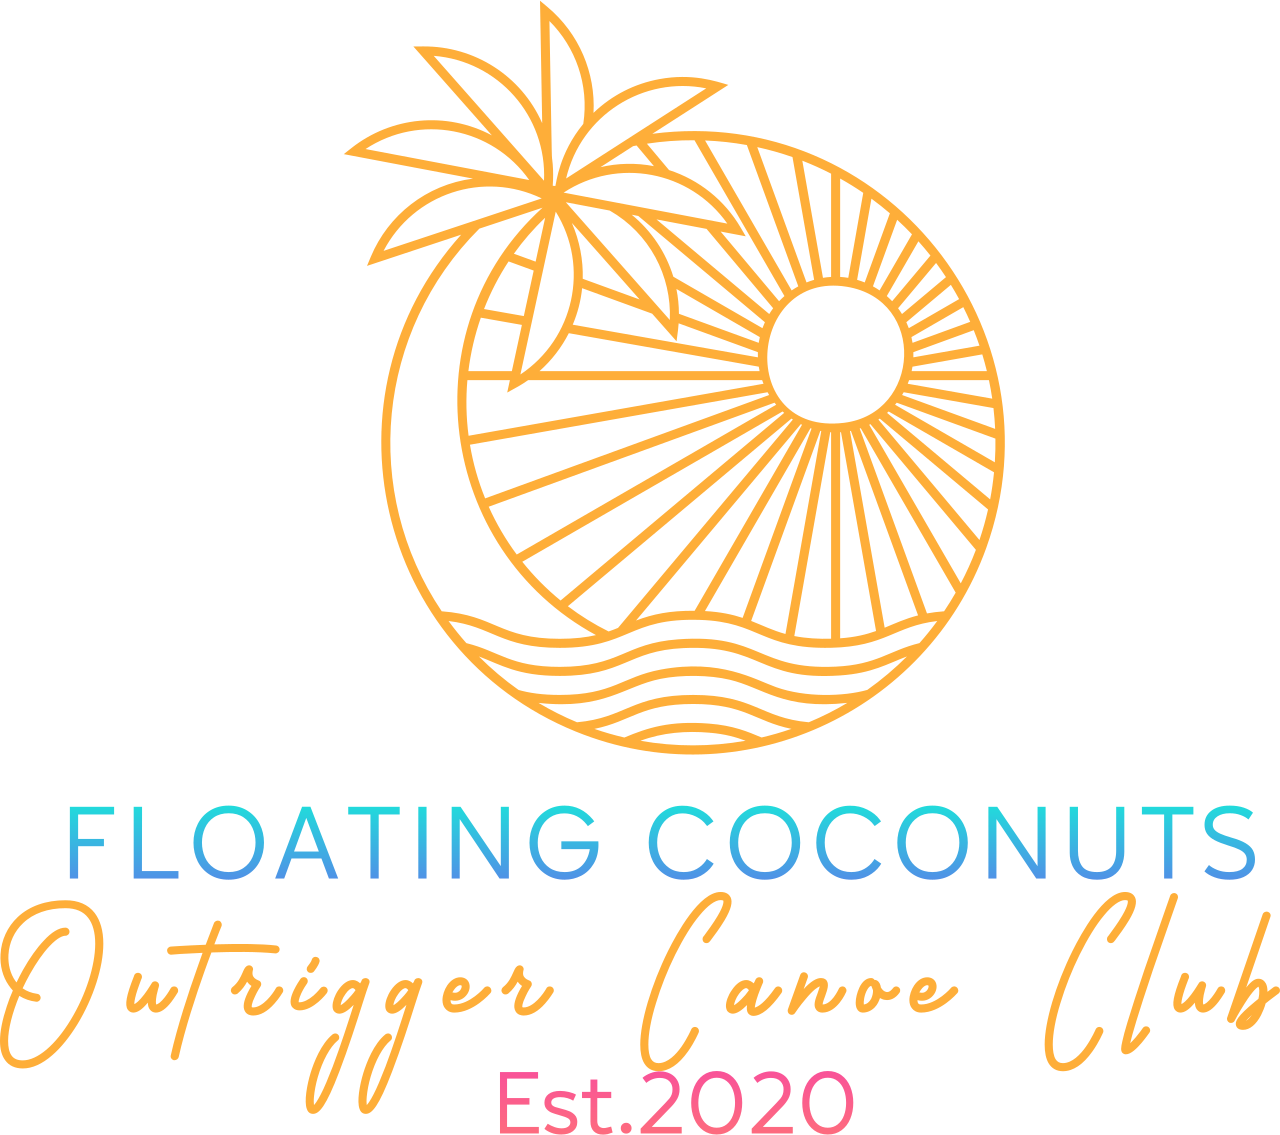 FLOATING COCONUTS 's web page